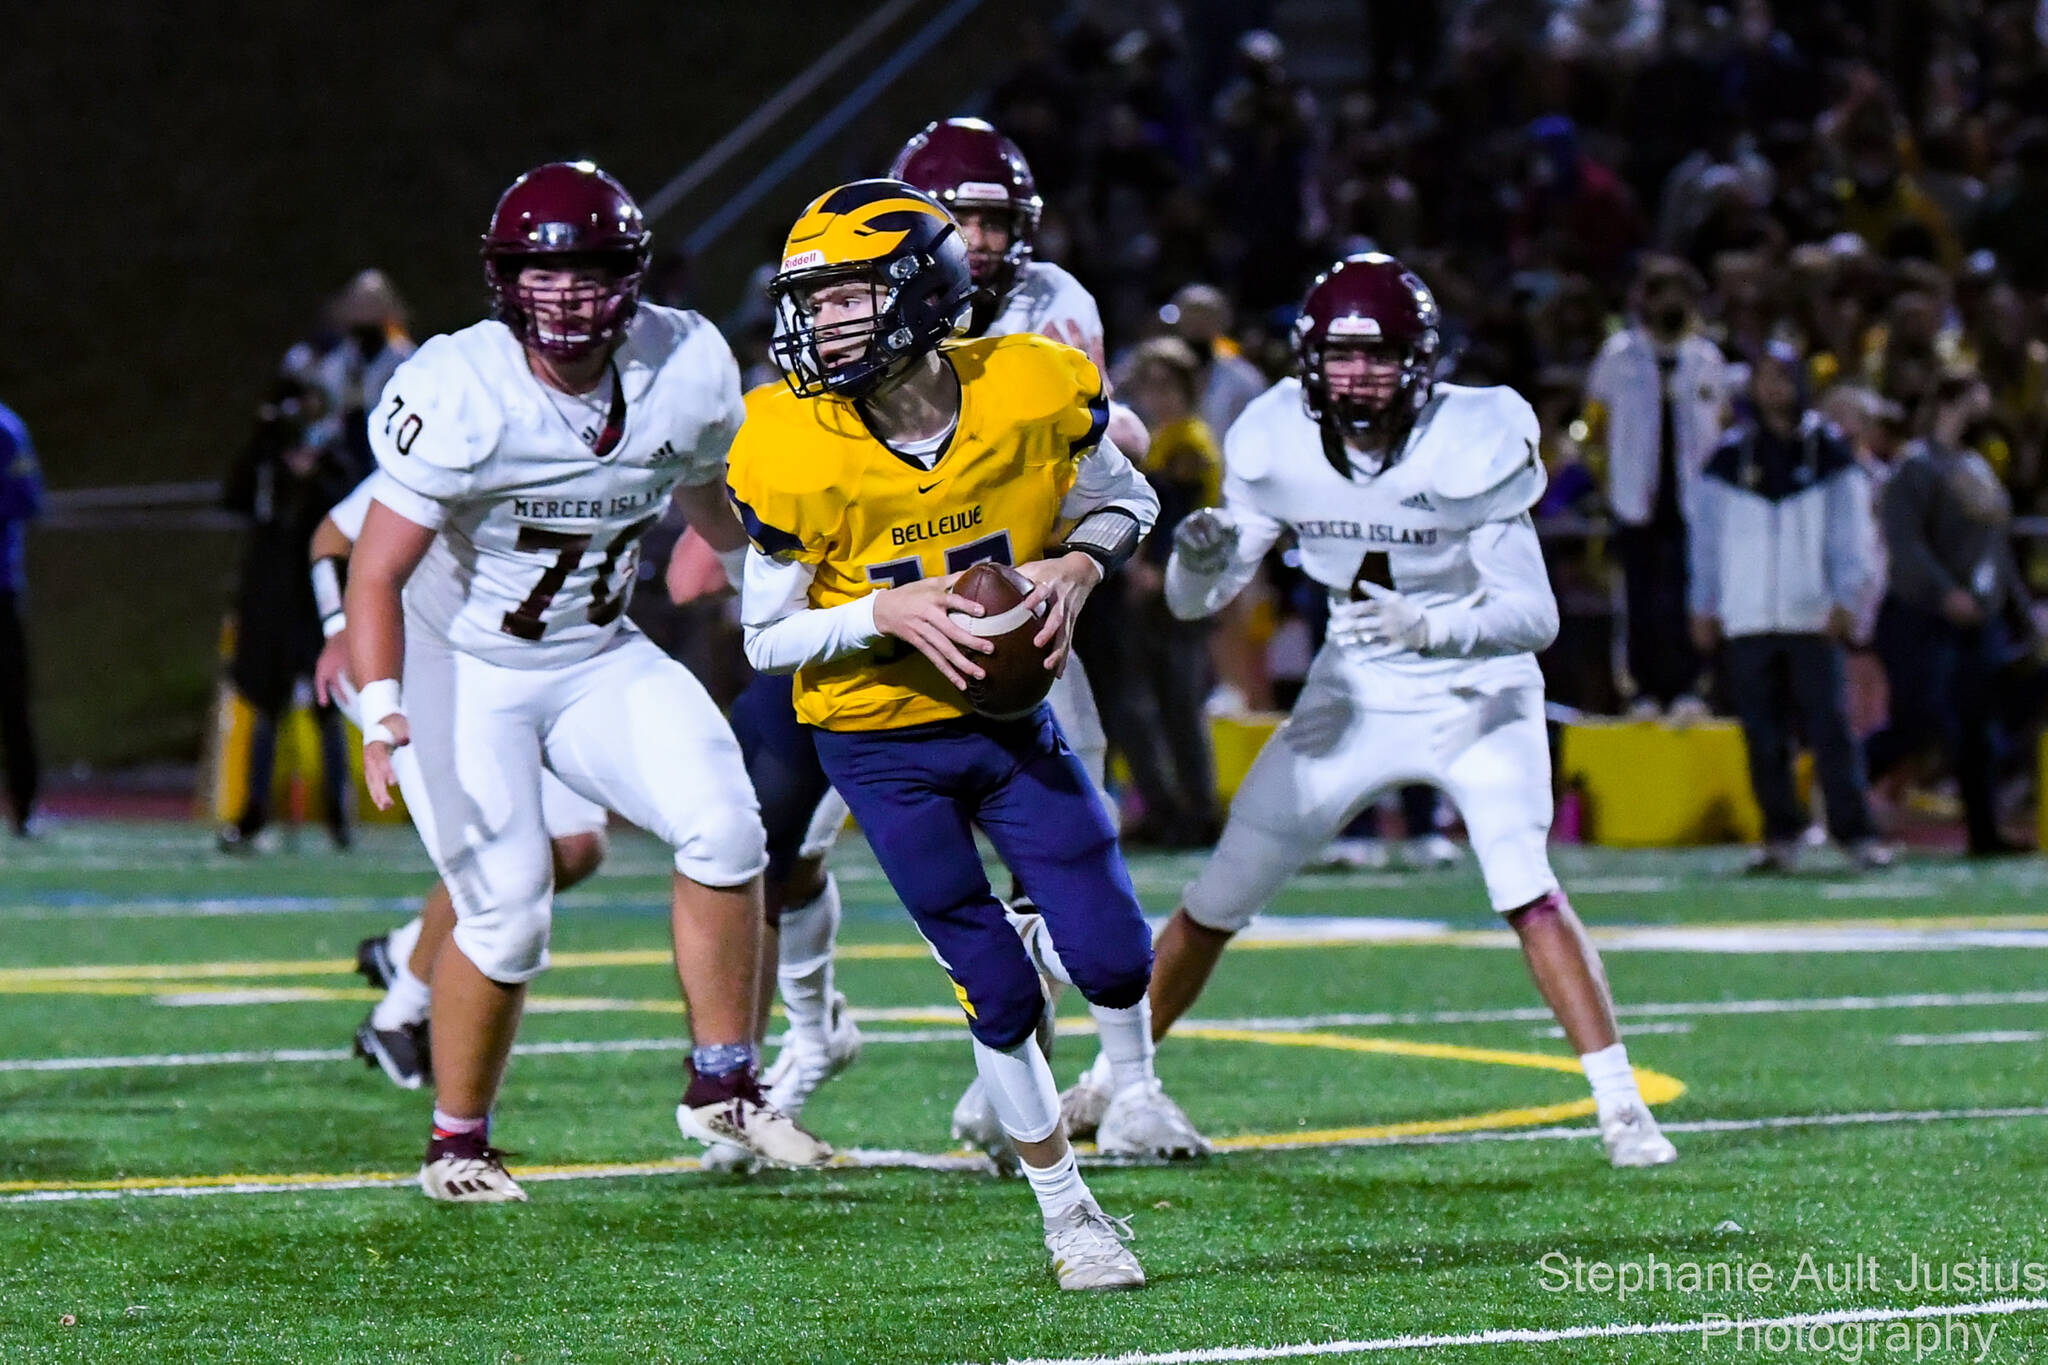 Bellevue quarterback Lucas Razore prepares to pass while Mercer Island’s Griffin King and Alexander Espinoza defend. Photo courtesy of Stephanie Ault Justus